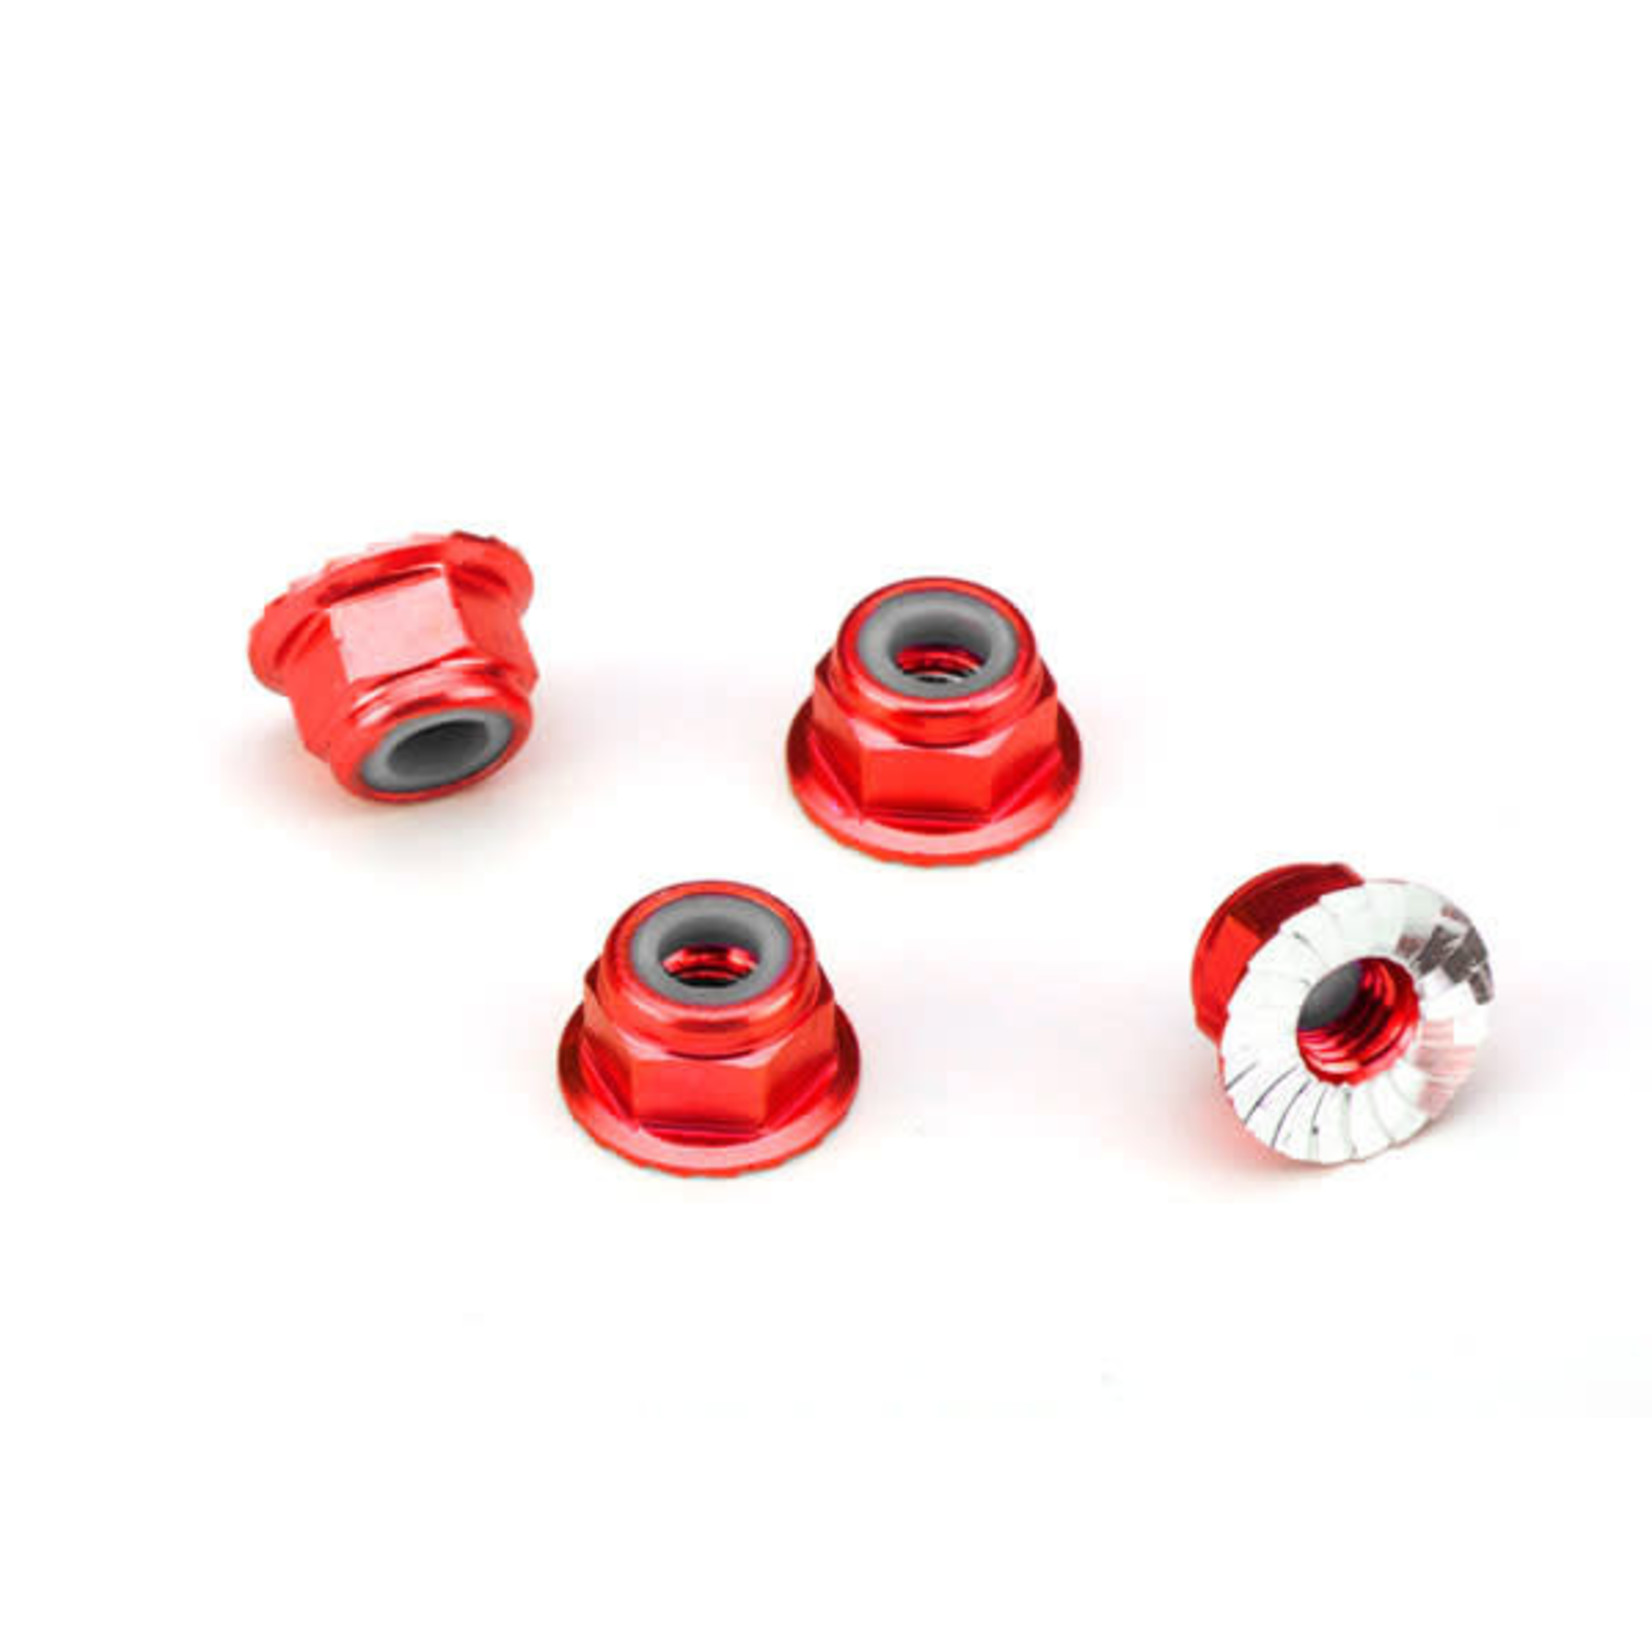 Traxxas TRA1747A Traxxas Nuts 4mm Flanged Lock Red